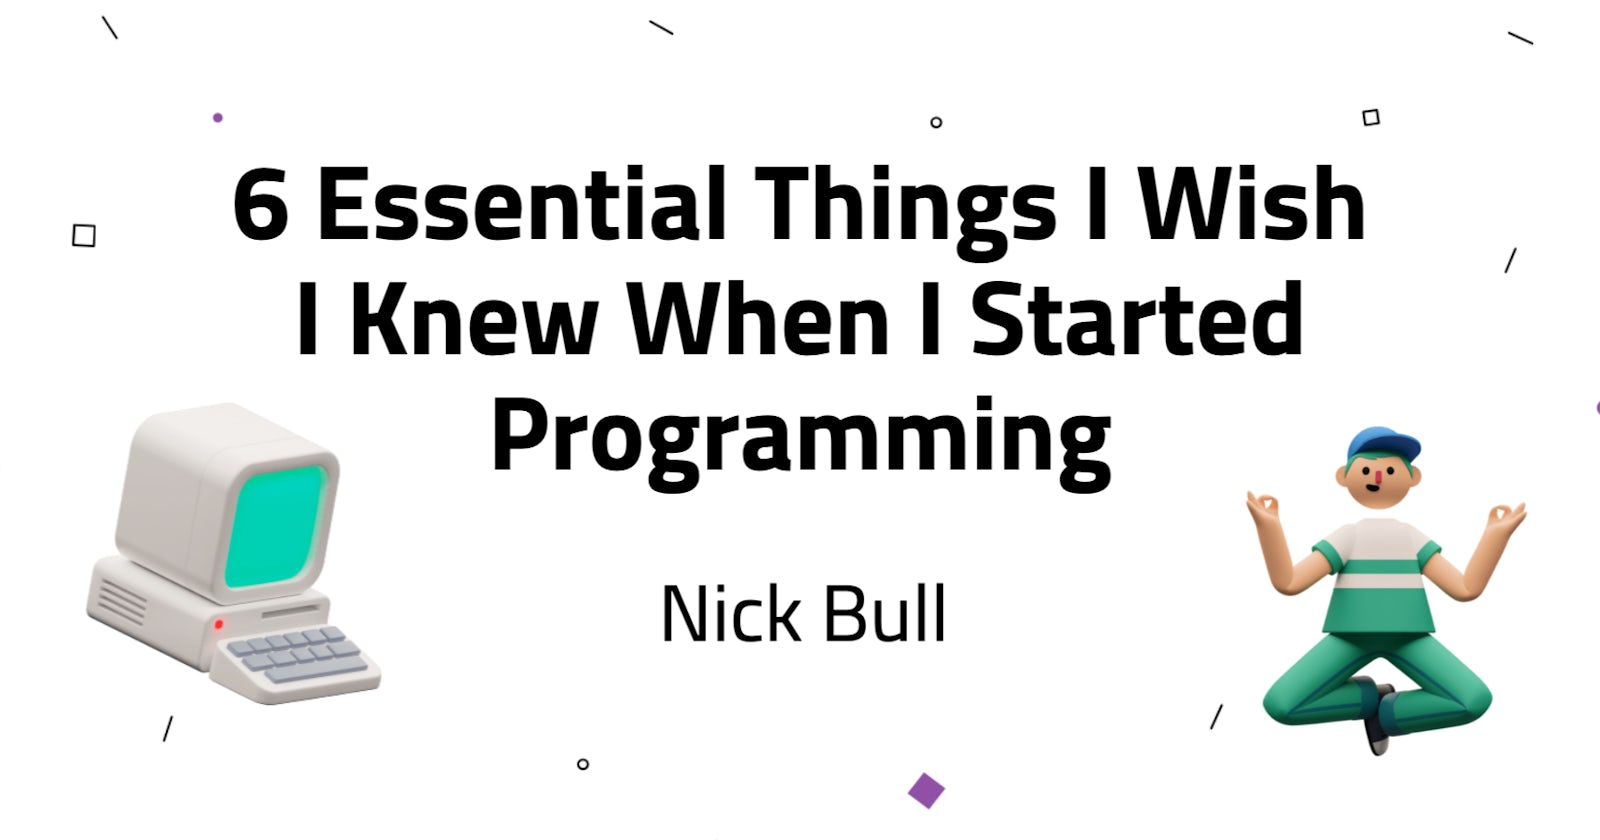 6 Essential Things I Wish I Knew When I Started Programming